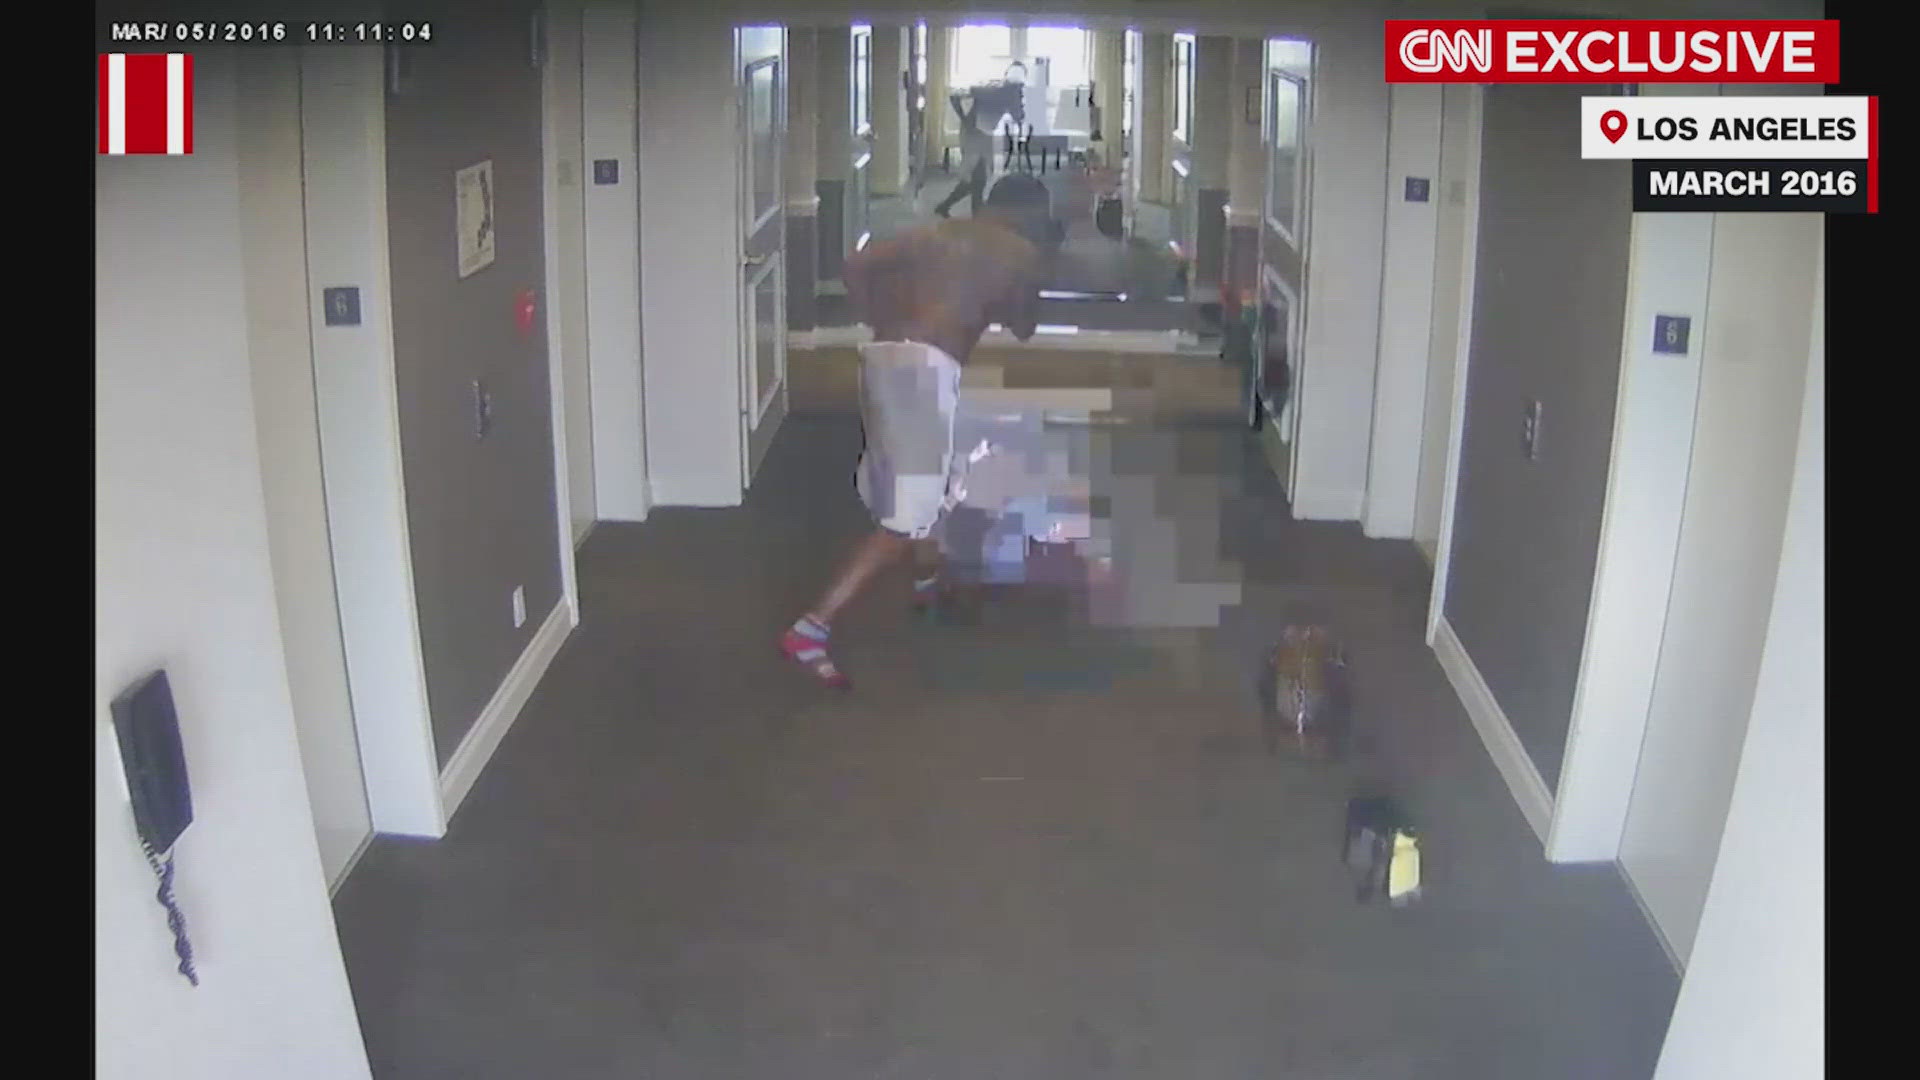 THE HOTEL SURVEILLANCE VIDEO -- SHOWING HER THEN BOYFRIEND -- SEAN "DIDDY" COMBS VIOLENTLY ATTACKING HER.